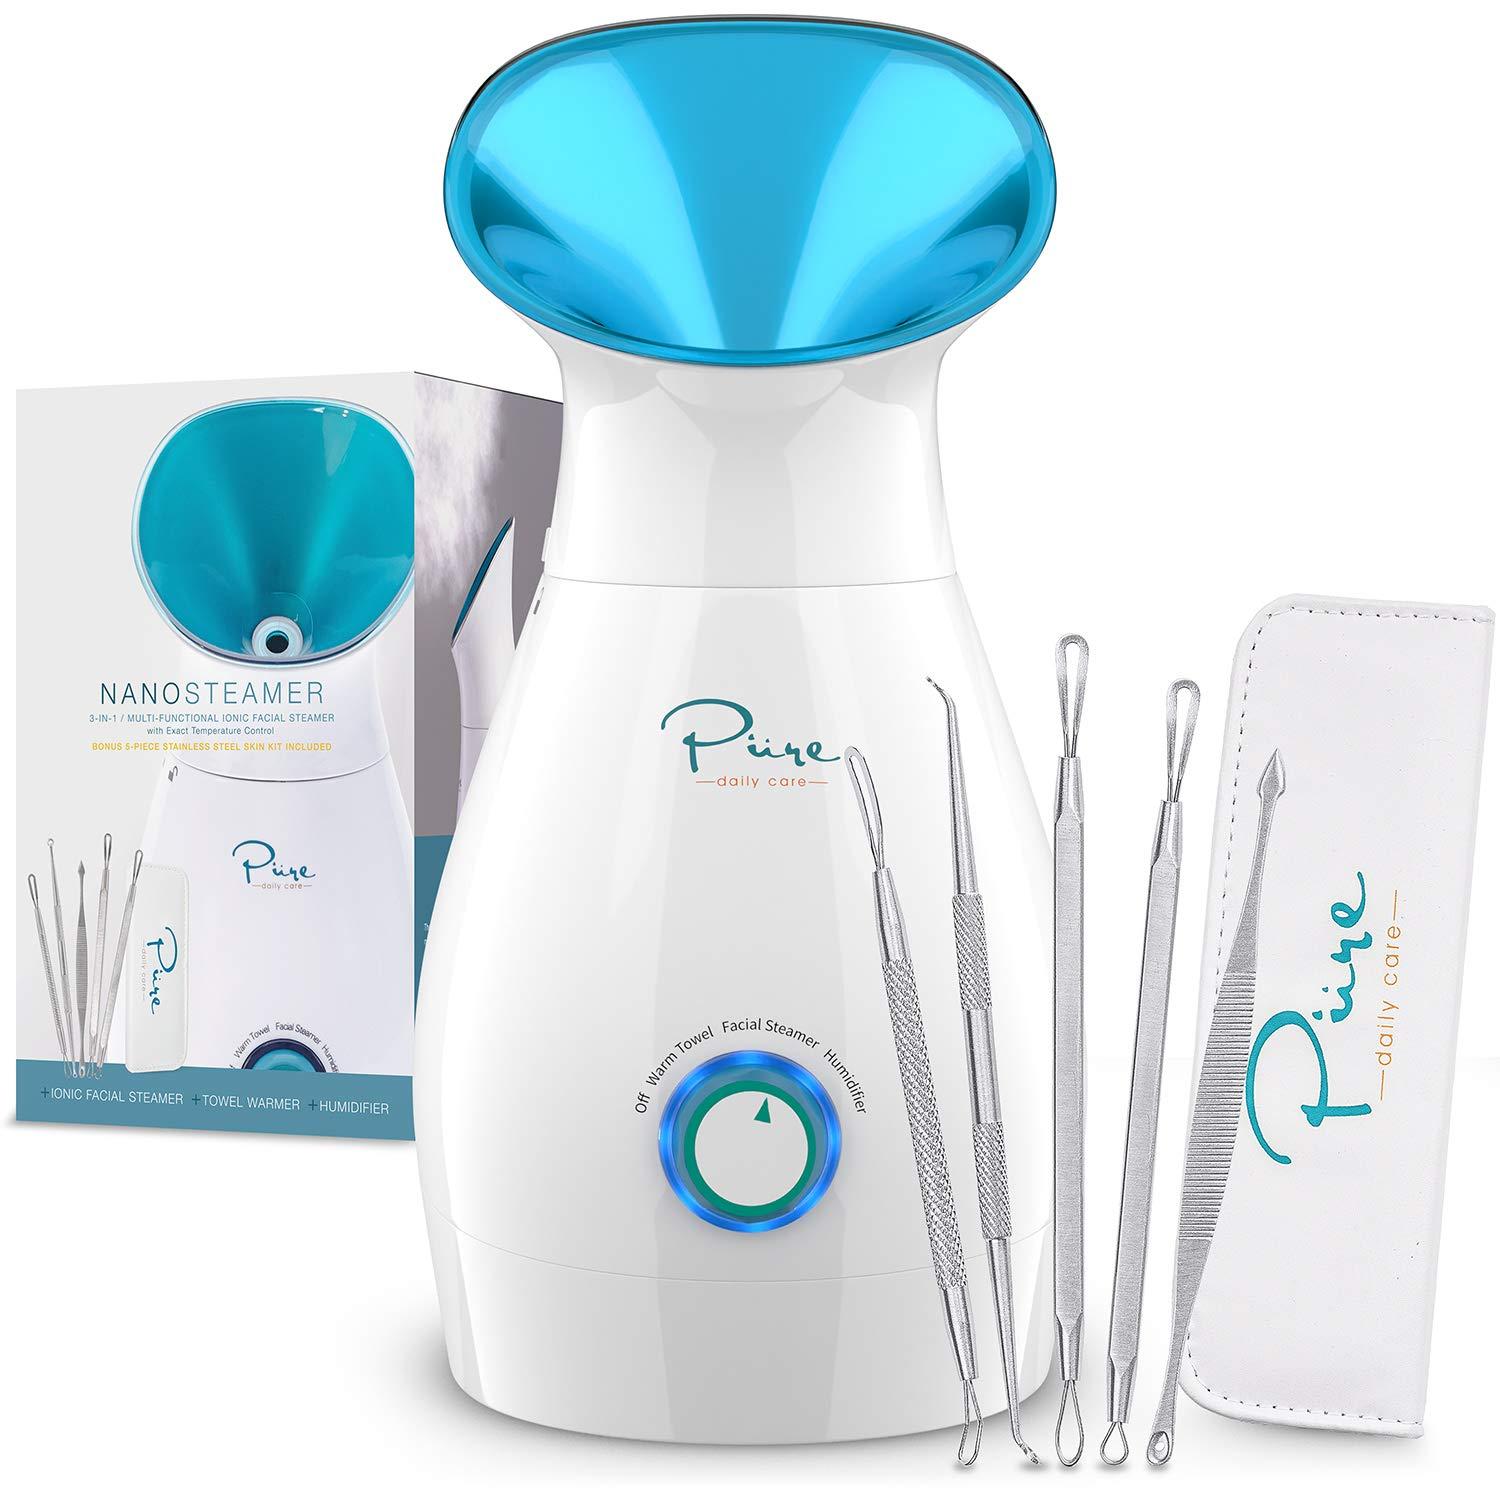 NanoSteamer Large 3-in-1 Nano Ionic Facial Steamer for $28.52 Shipped